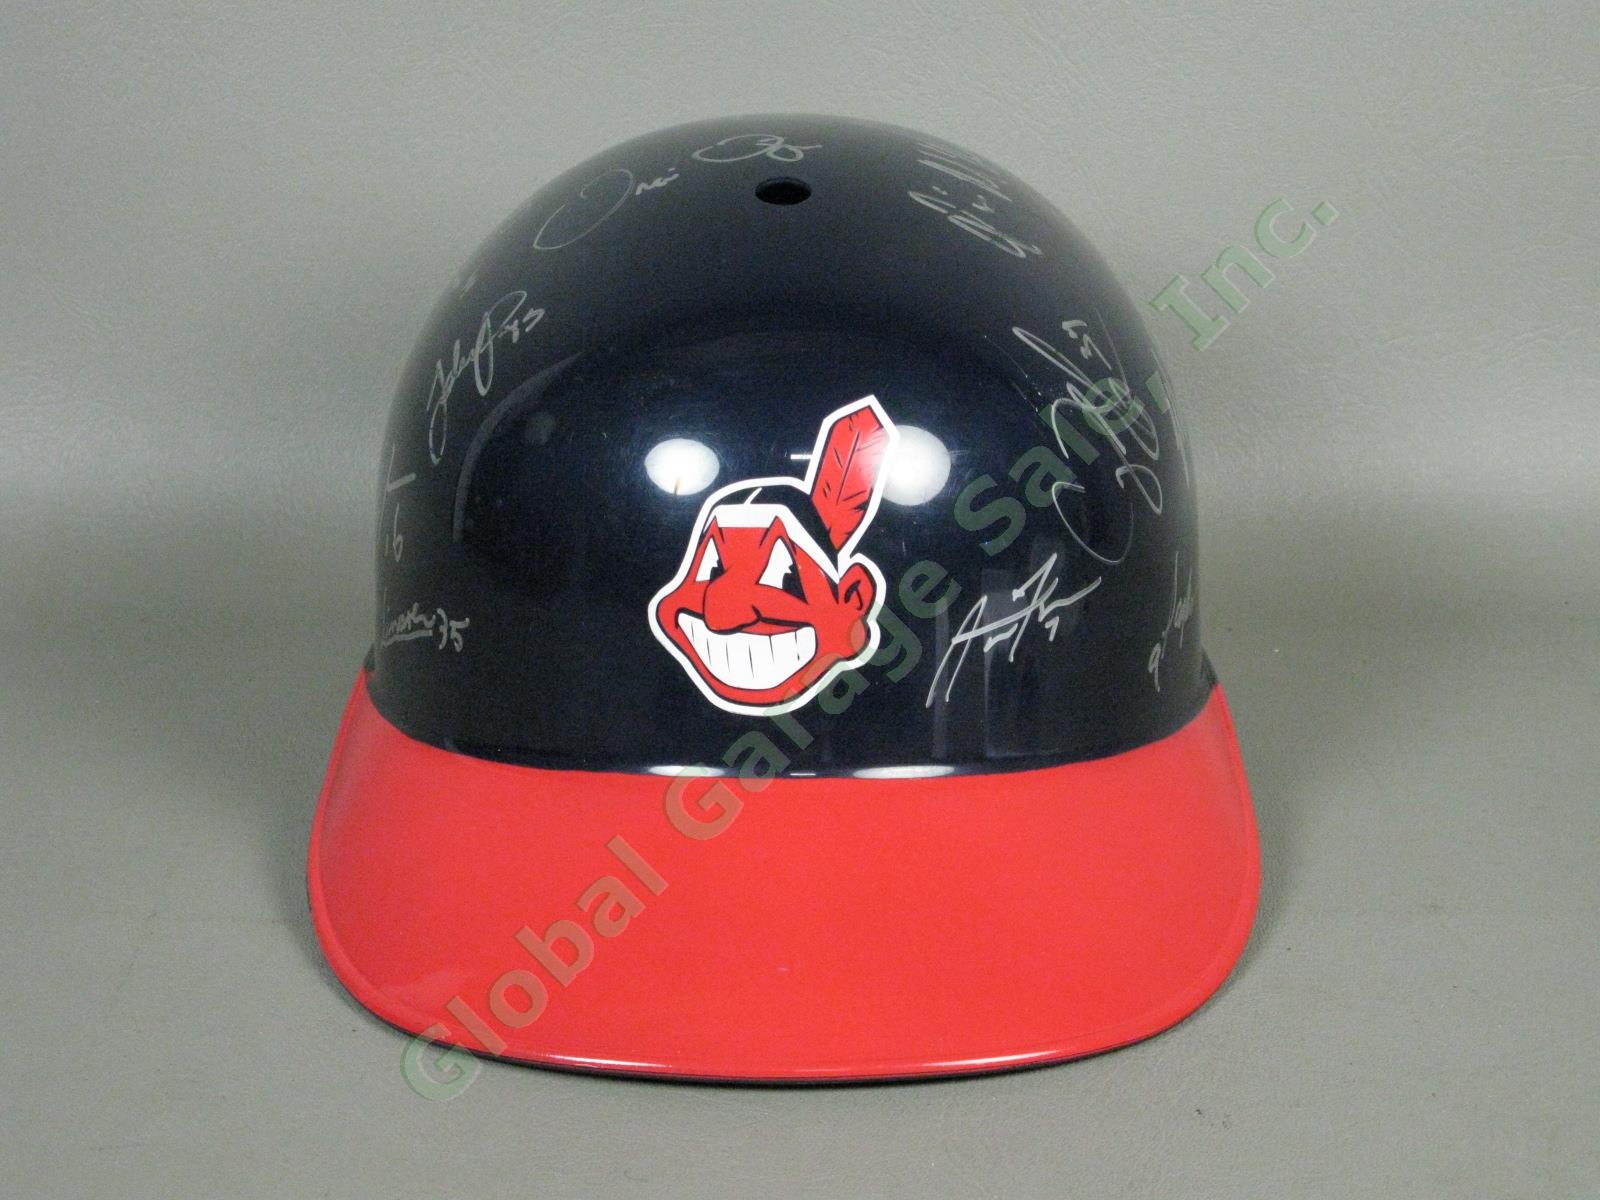 2015 Mahoning Valley Scrappers Team Signed Baseball Helmet Cleveland Indians NR